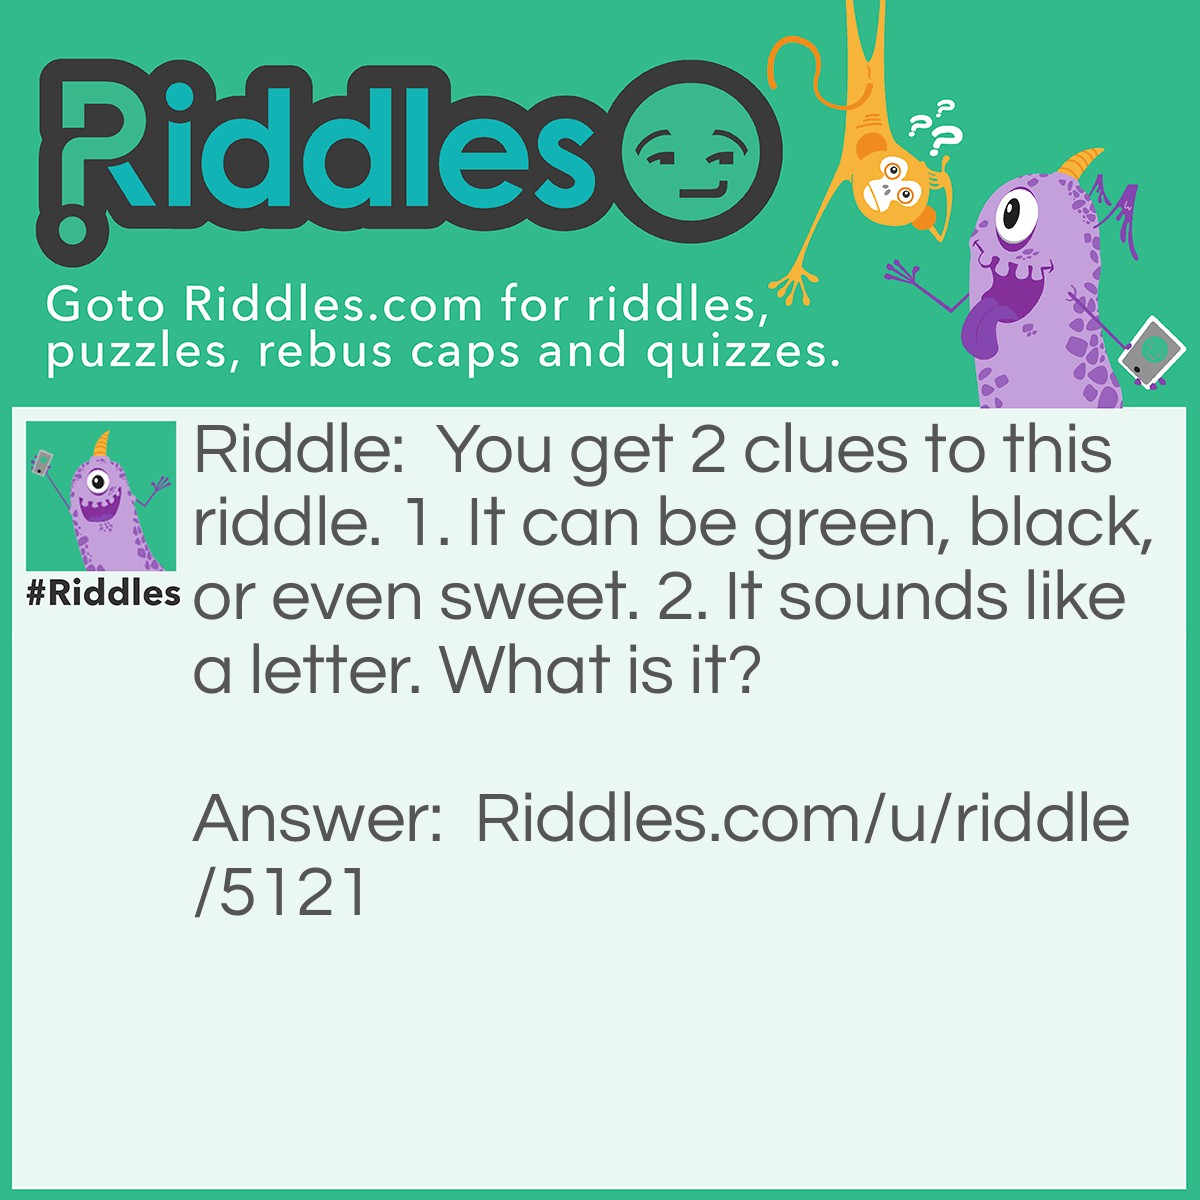 Riddle: You get 2 clues to this <a href="https://www.riddles.com">riddle</a>. 1. It can be green, black, or even sweet. 2. It sounds like a letter. What is it? Answer: Tea.